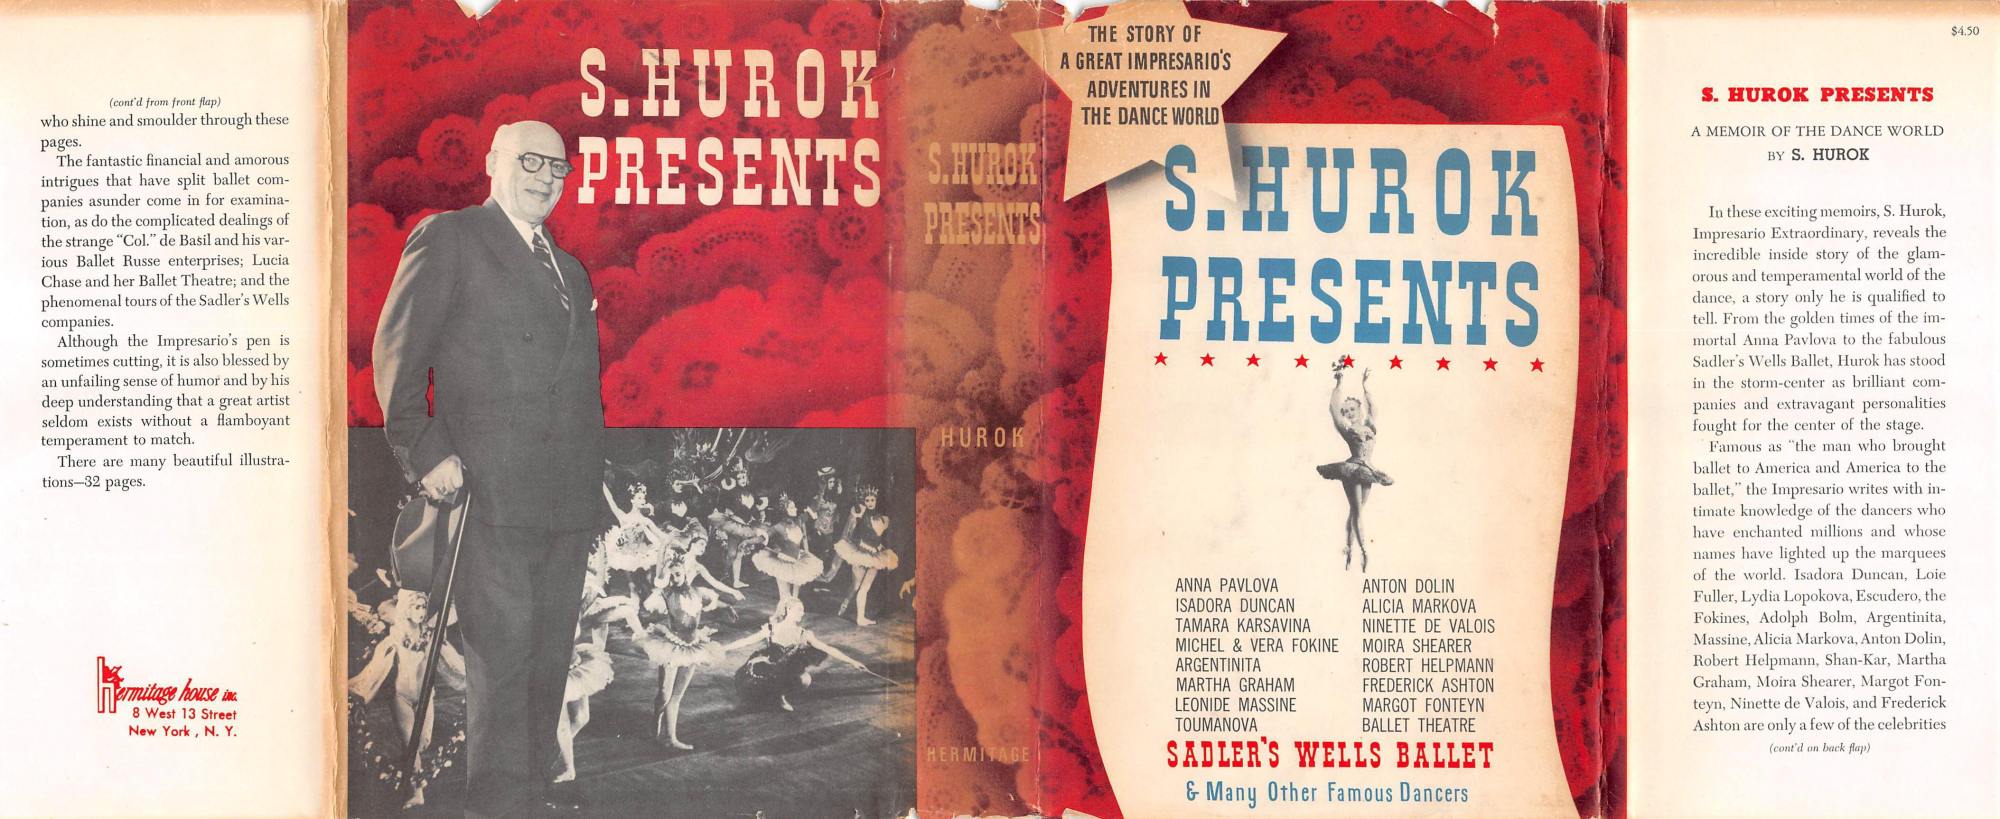 The Project Gutenberg eBook of a memoir of the Dance World, by Sol Hurok. image